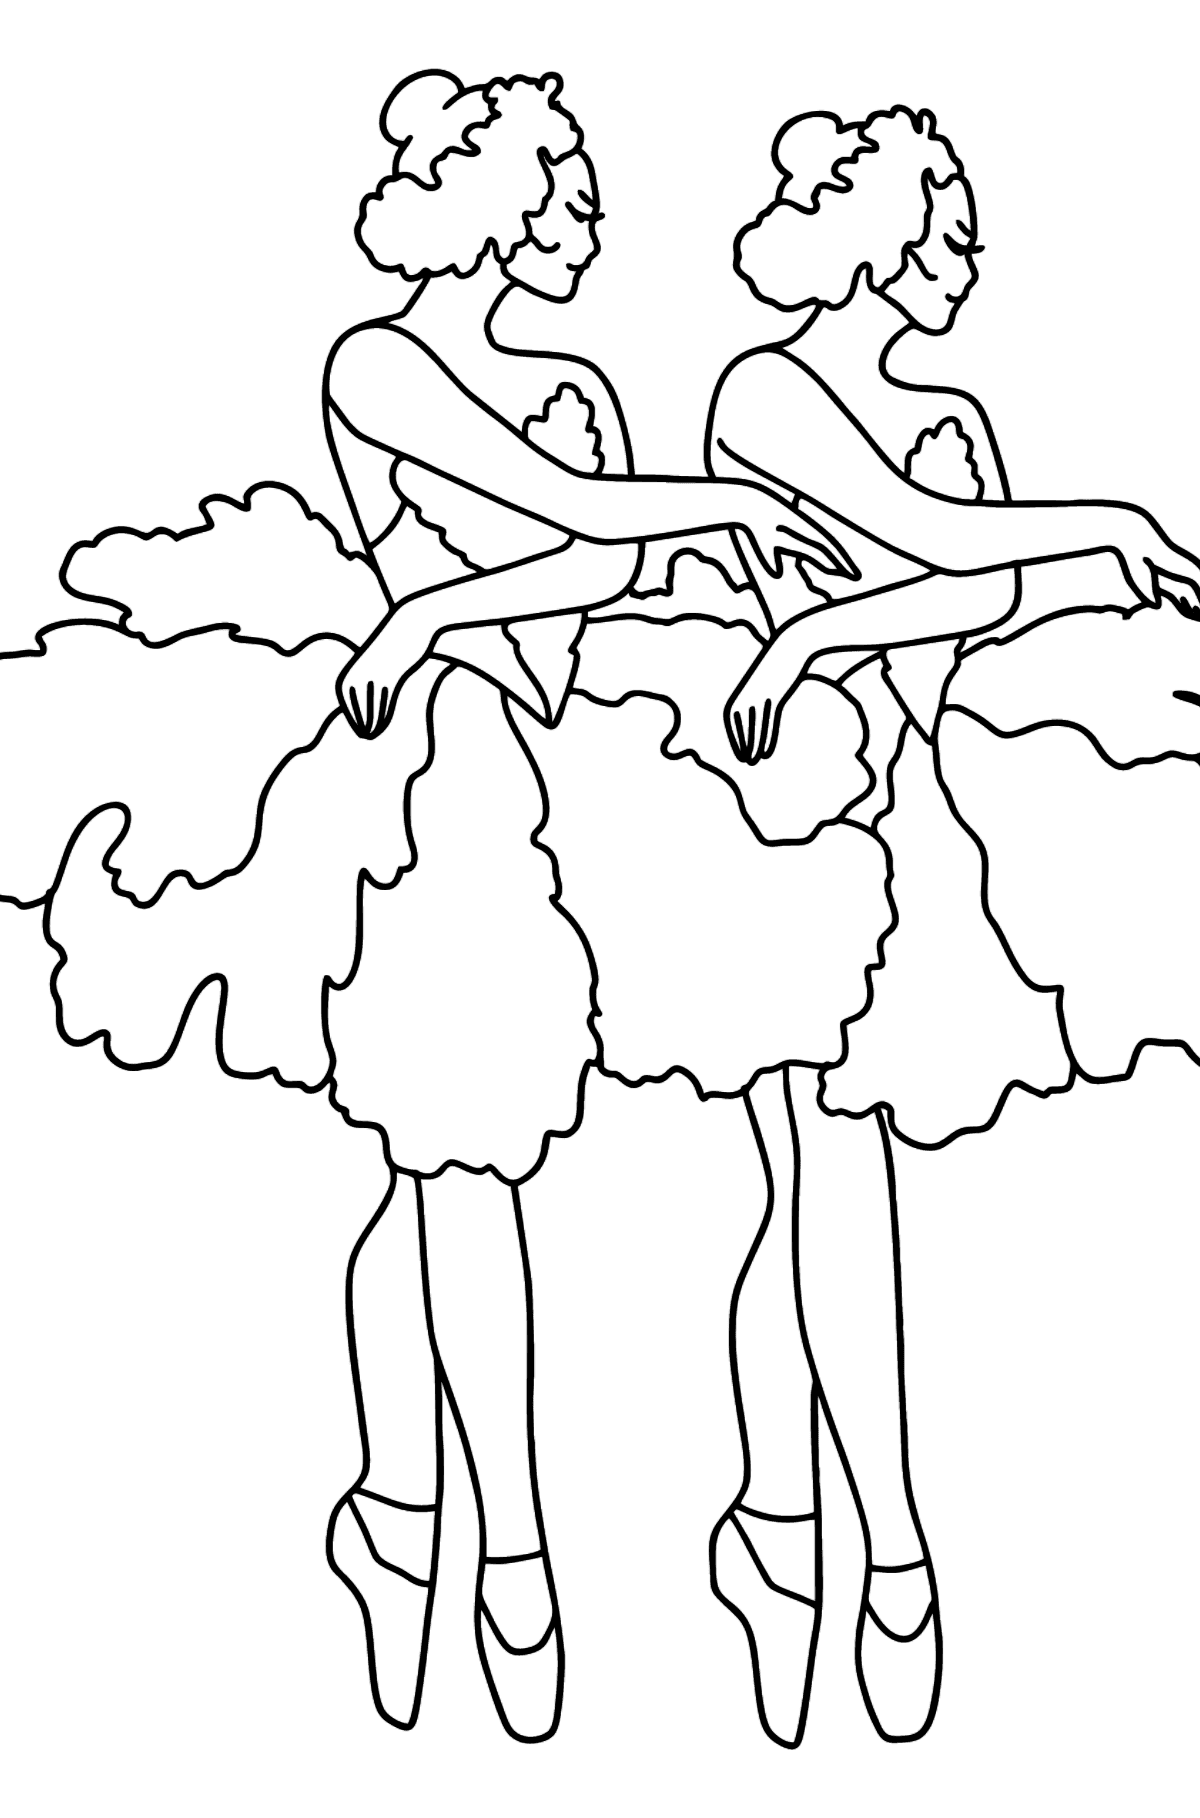 Beautiful Ballerinas coloring page - Coloring Pages for Kids